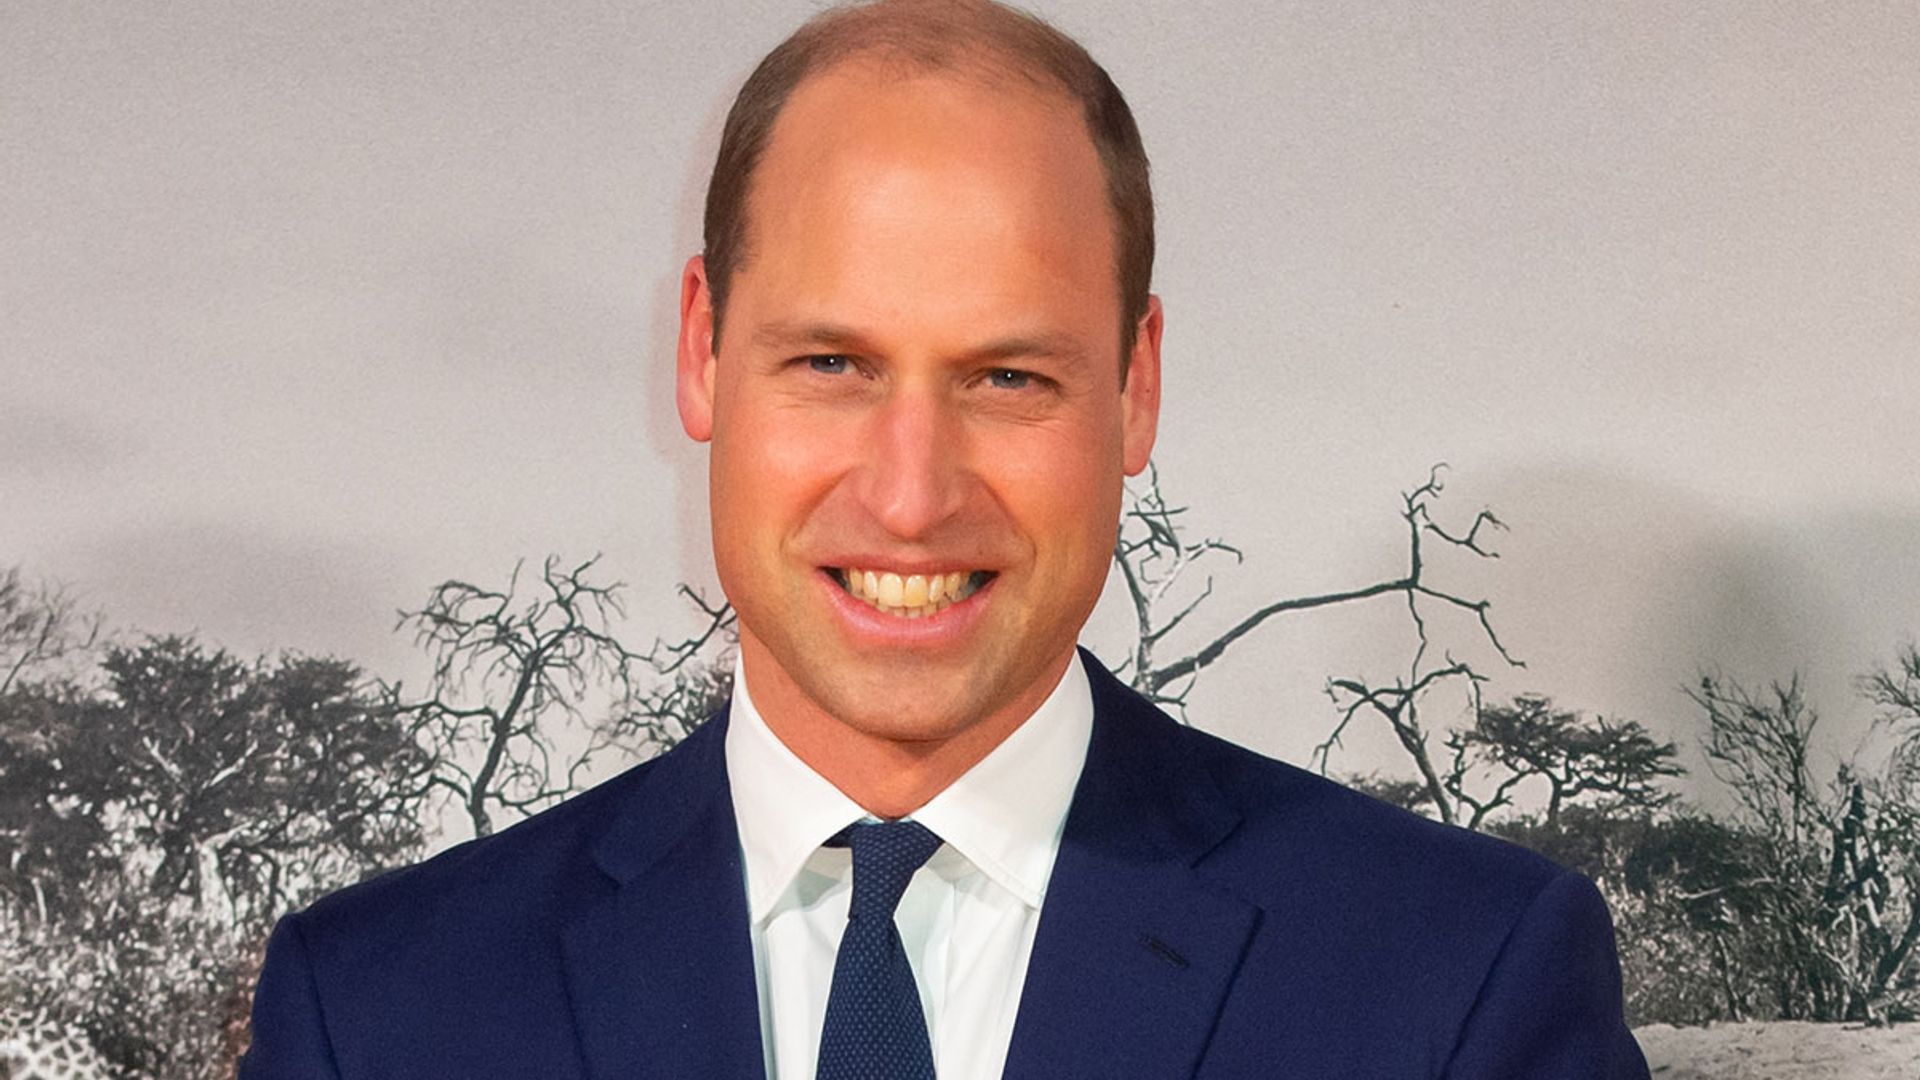 Prince William releases personal message on 40th birthday